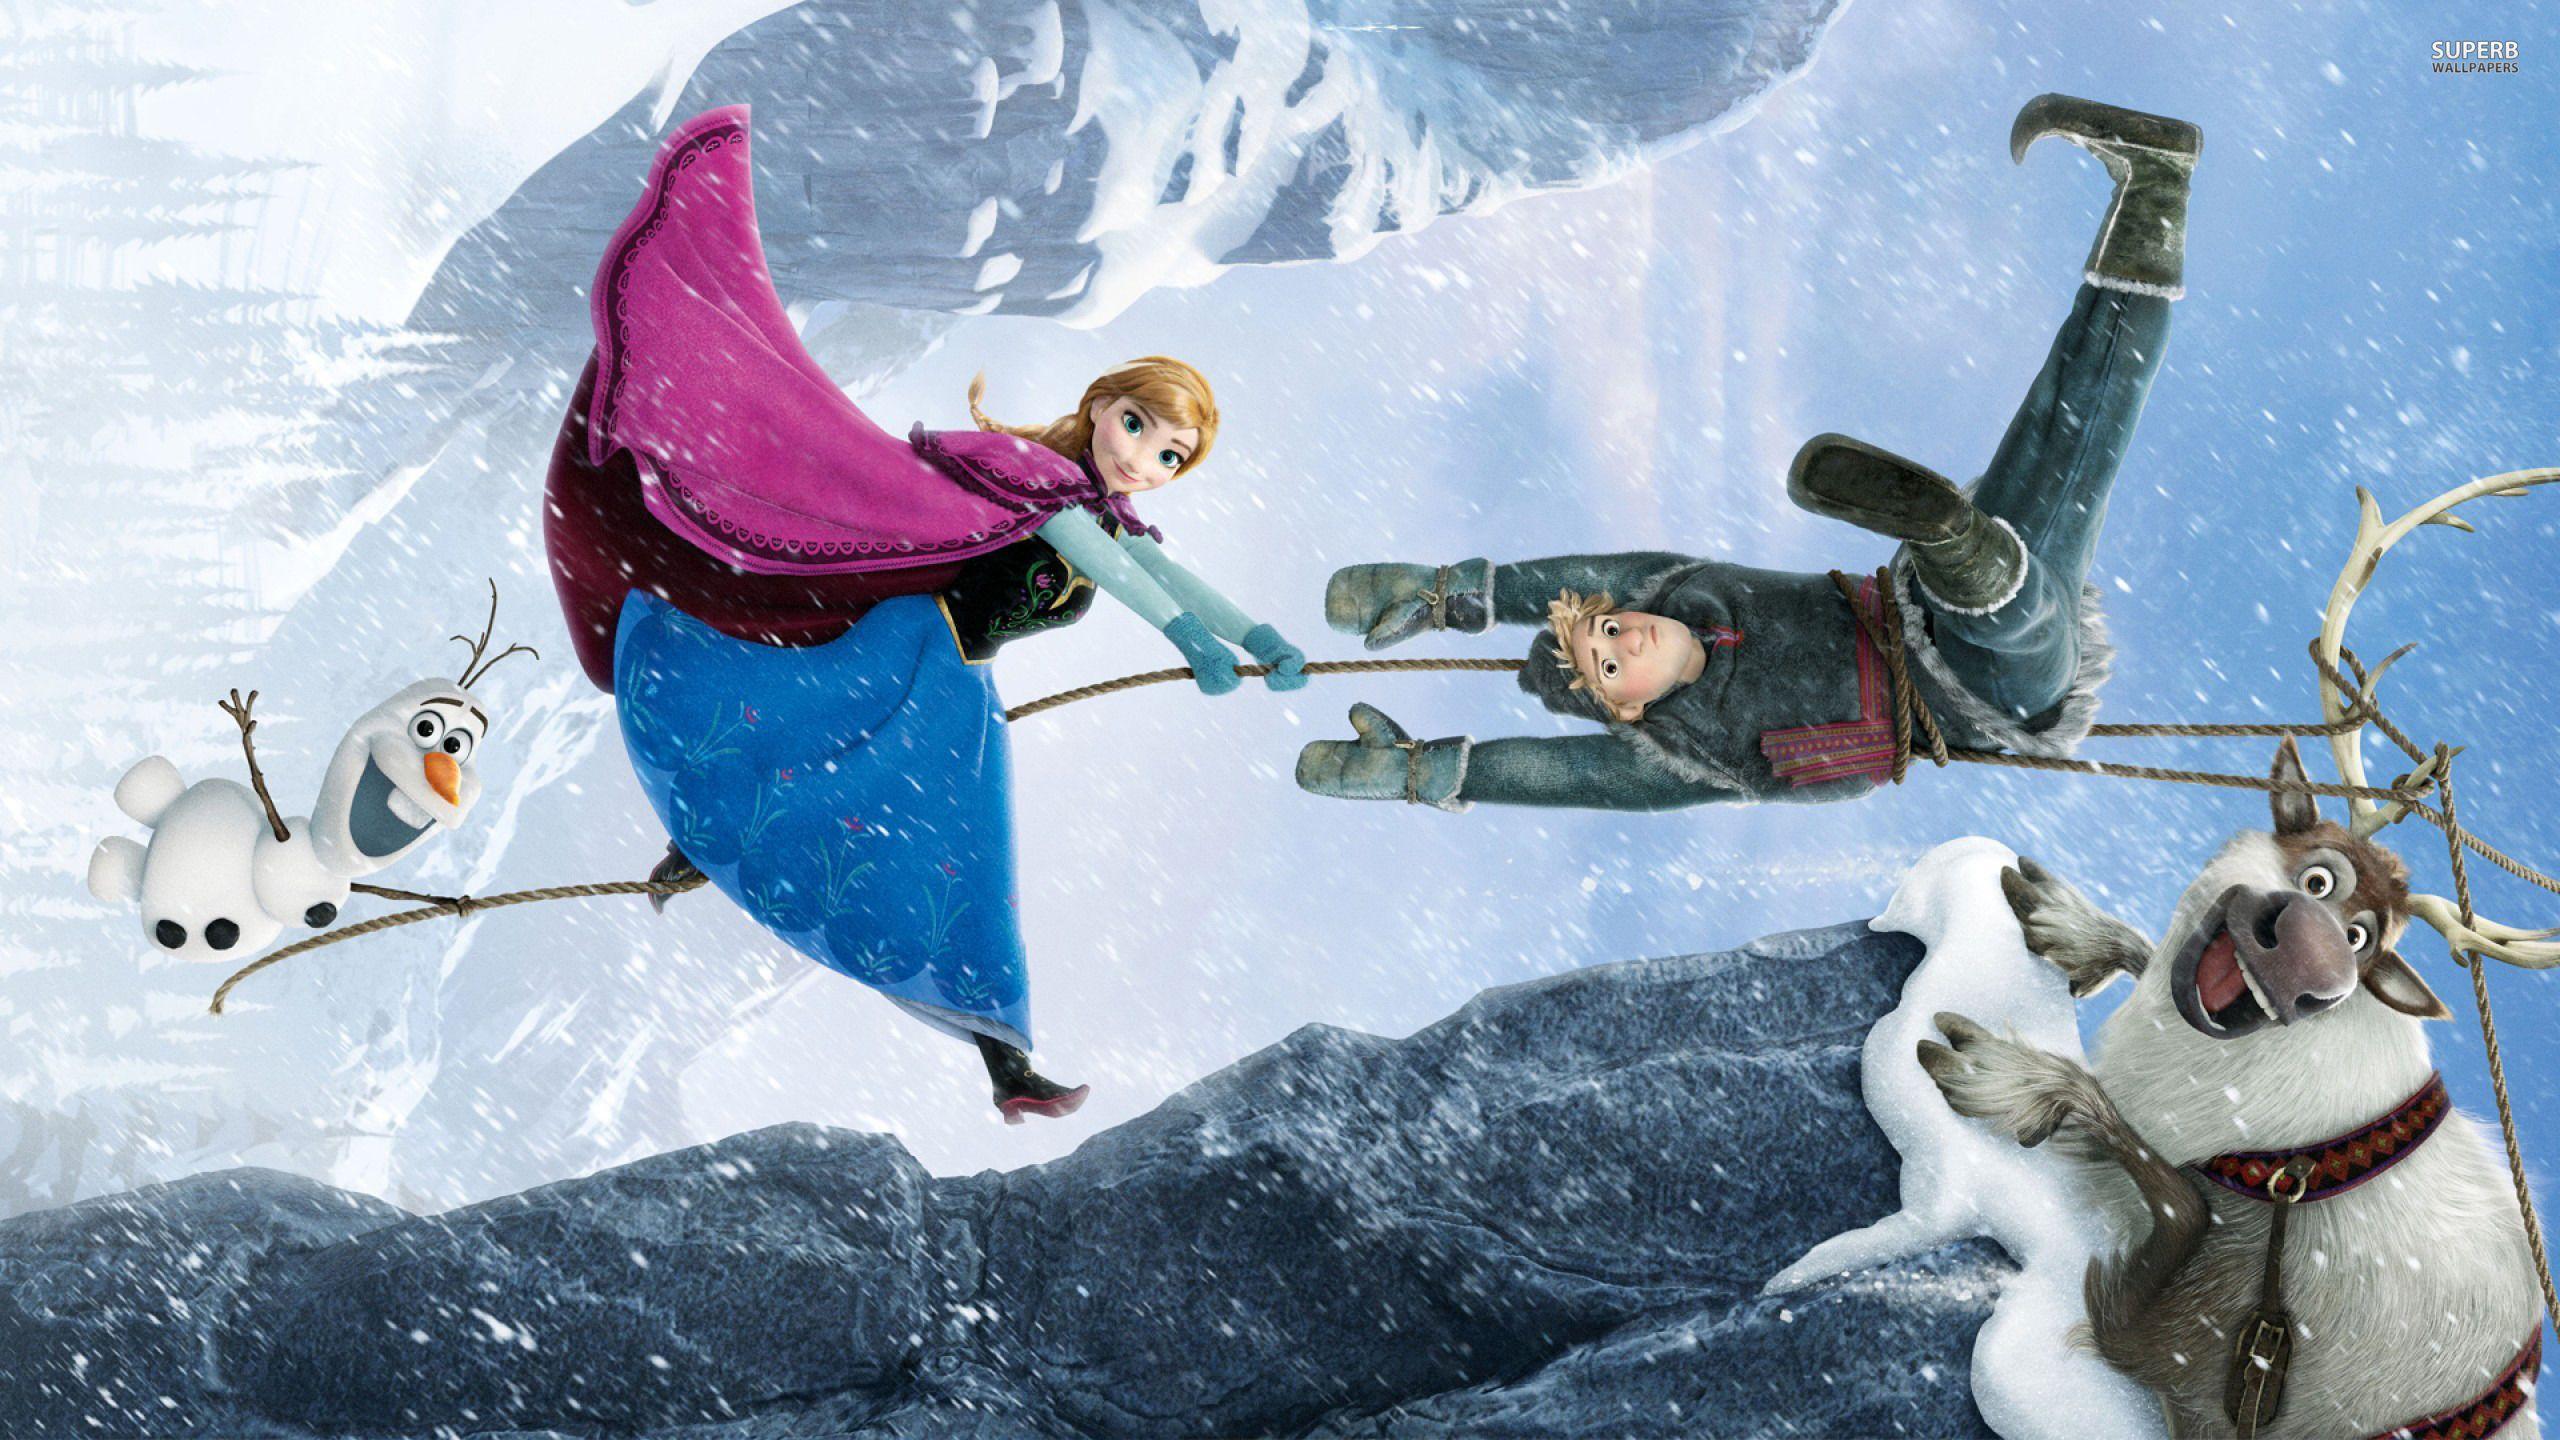 Cartoon Wallpaper: Frozen Movie Wallpaper Android with High